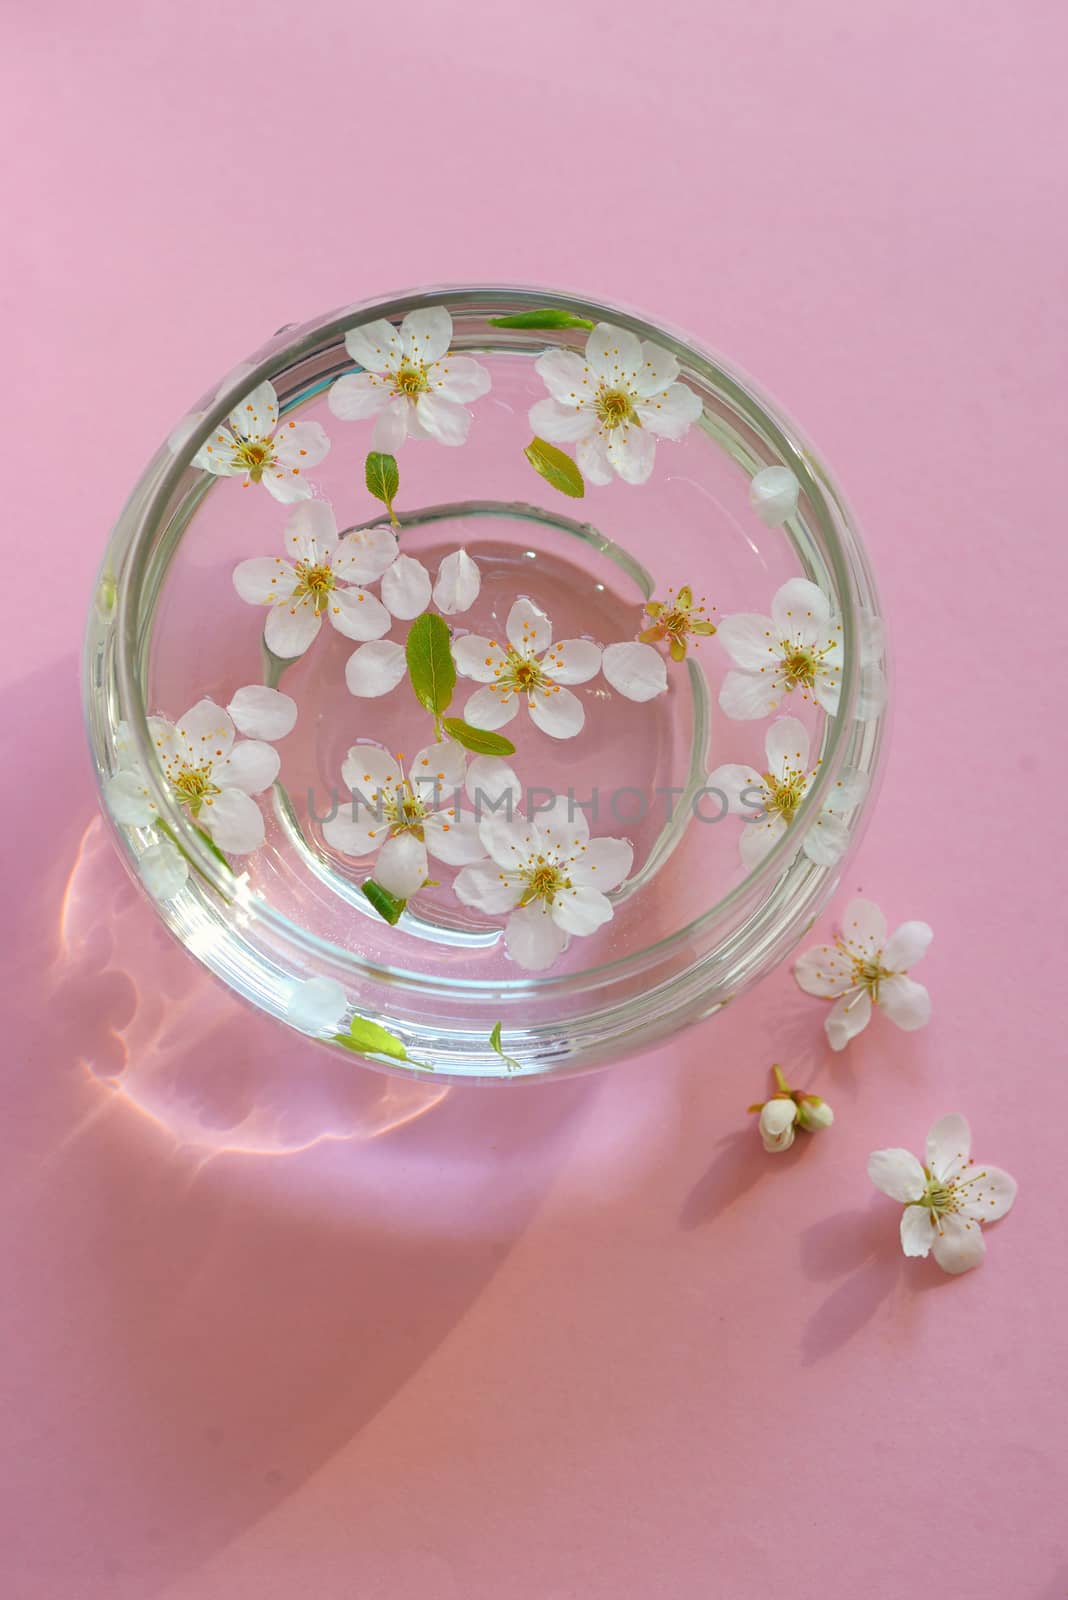 Cherry blossom twig with water bowl  by jordachelr